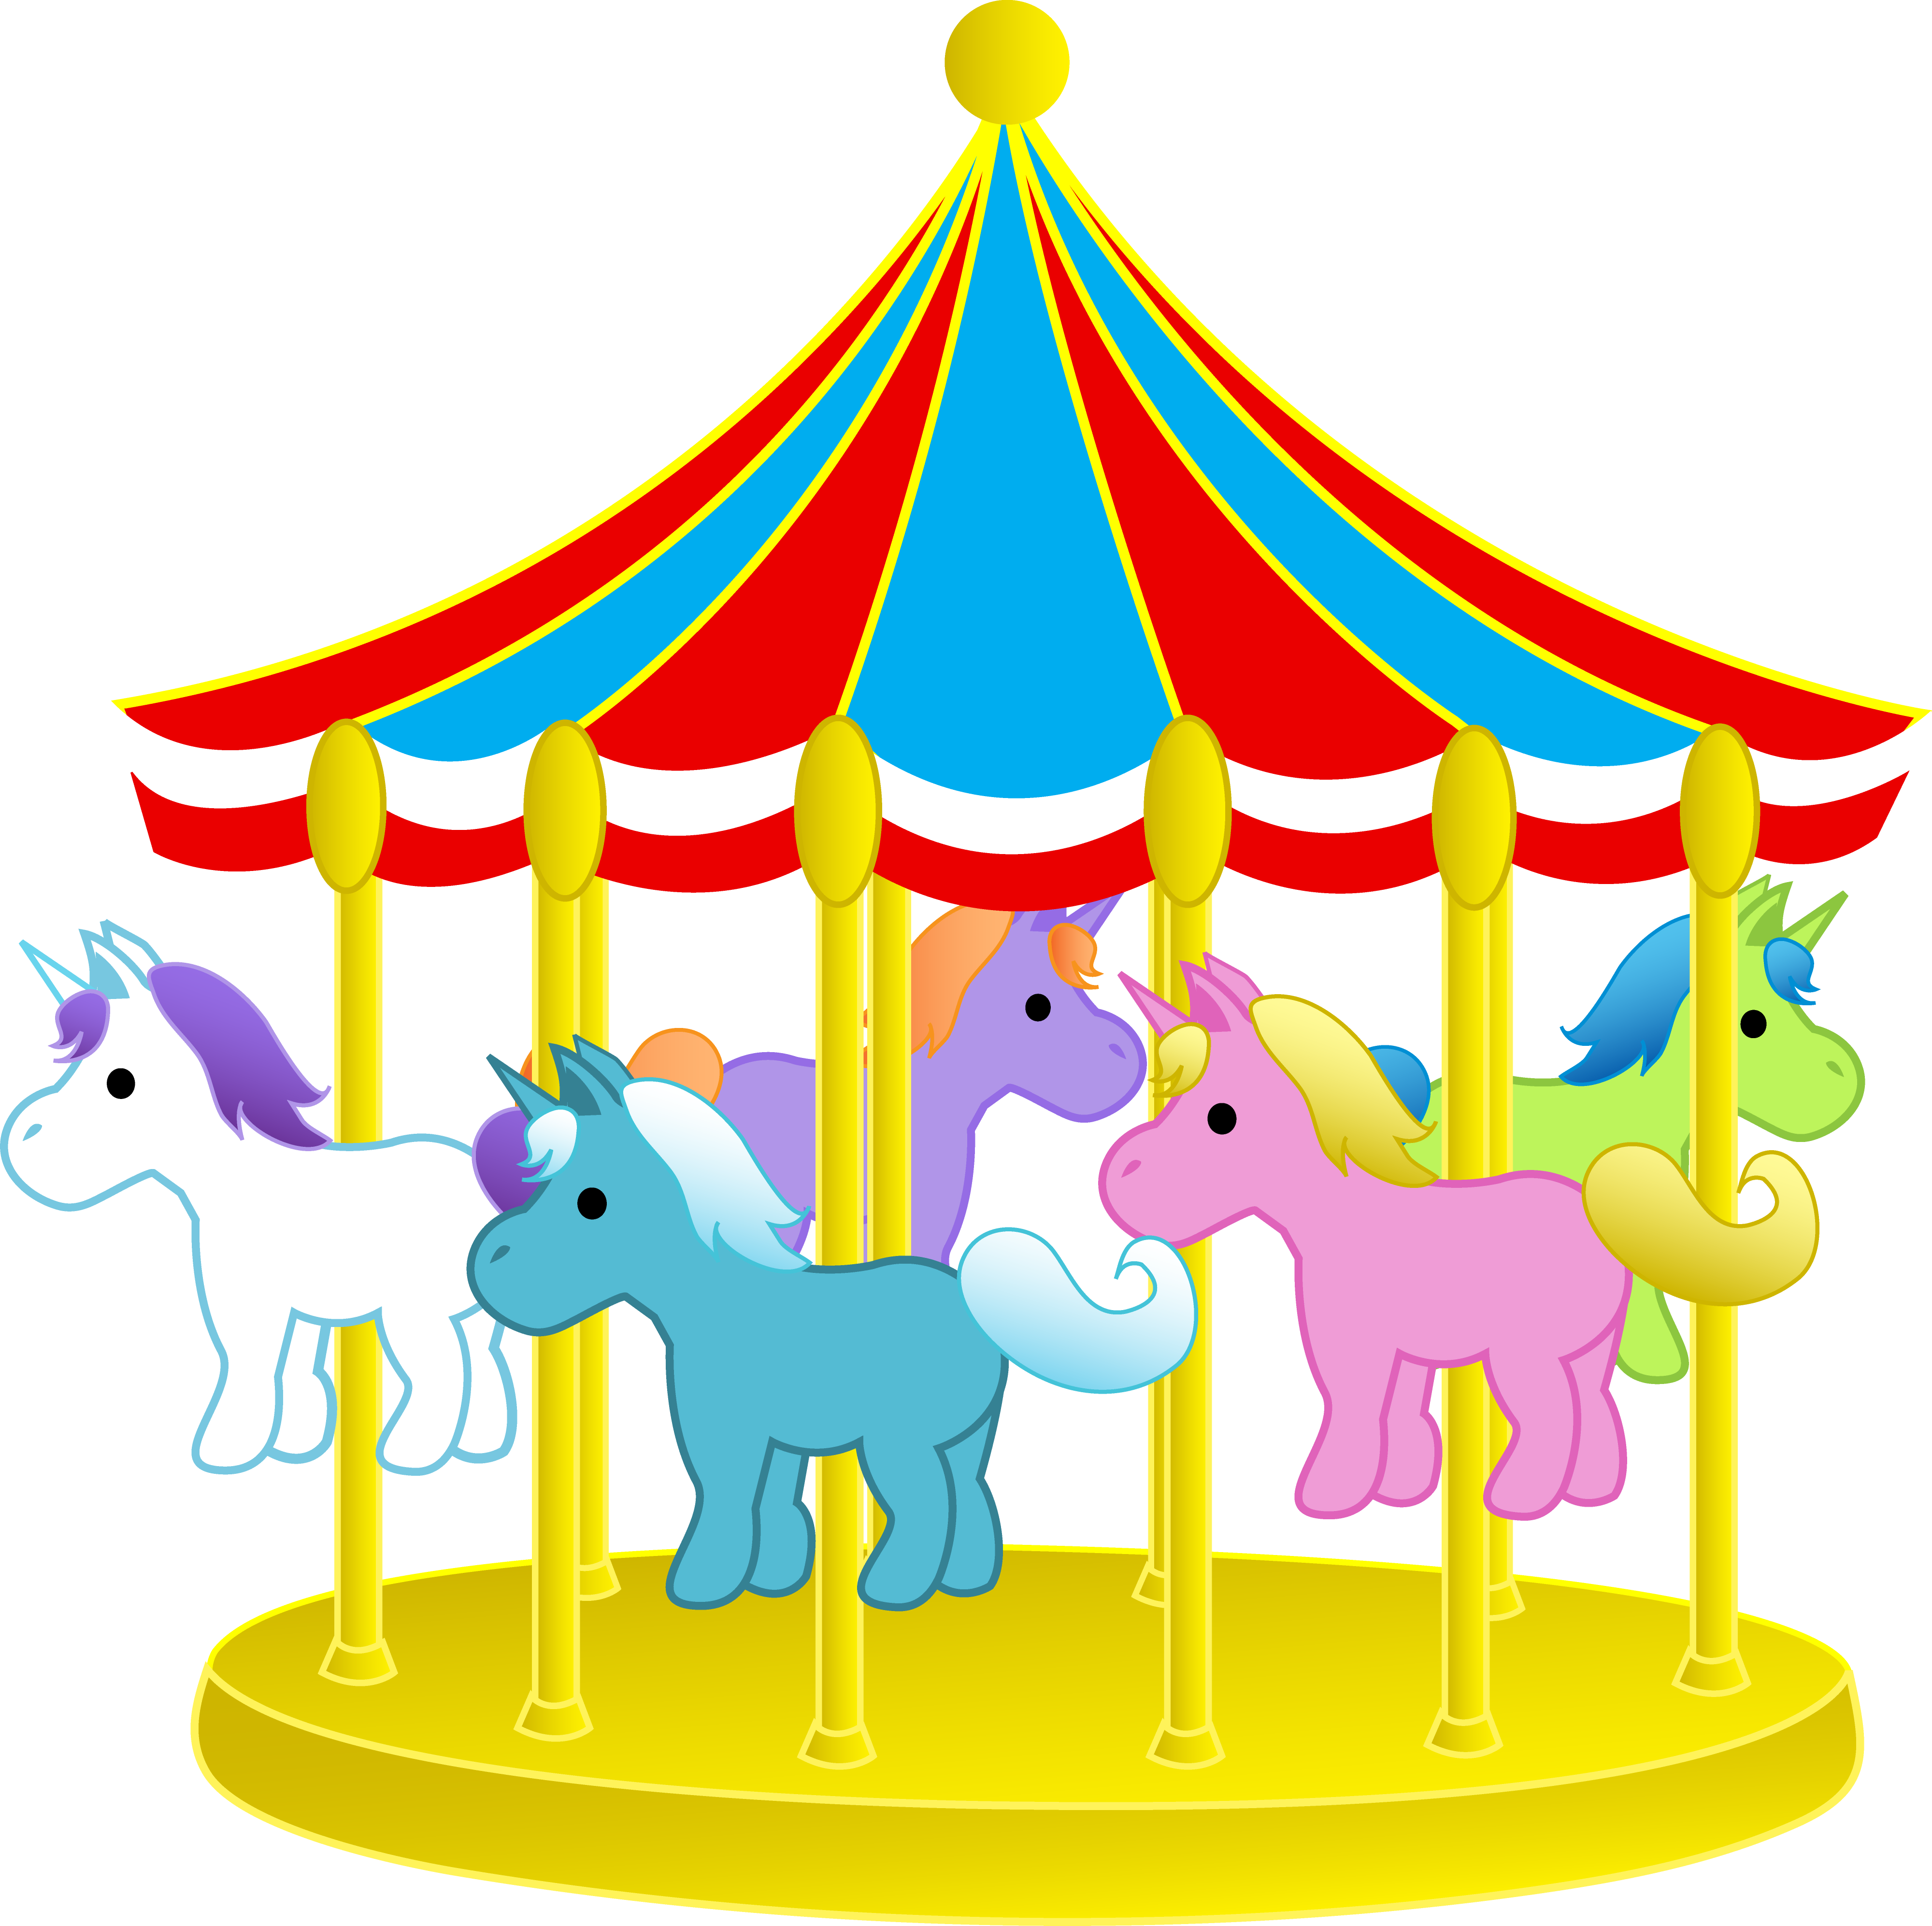 Cute carnival carousel with. Park clipart walking park